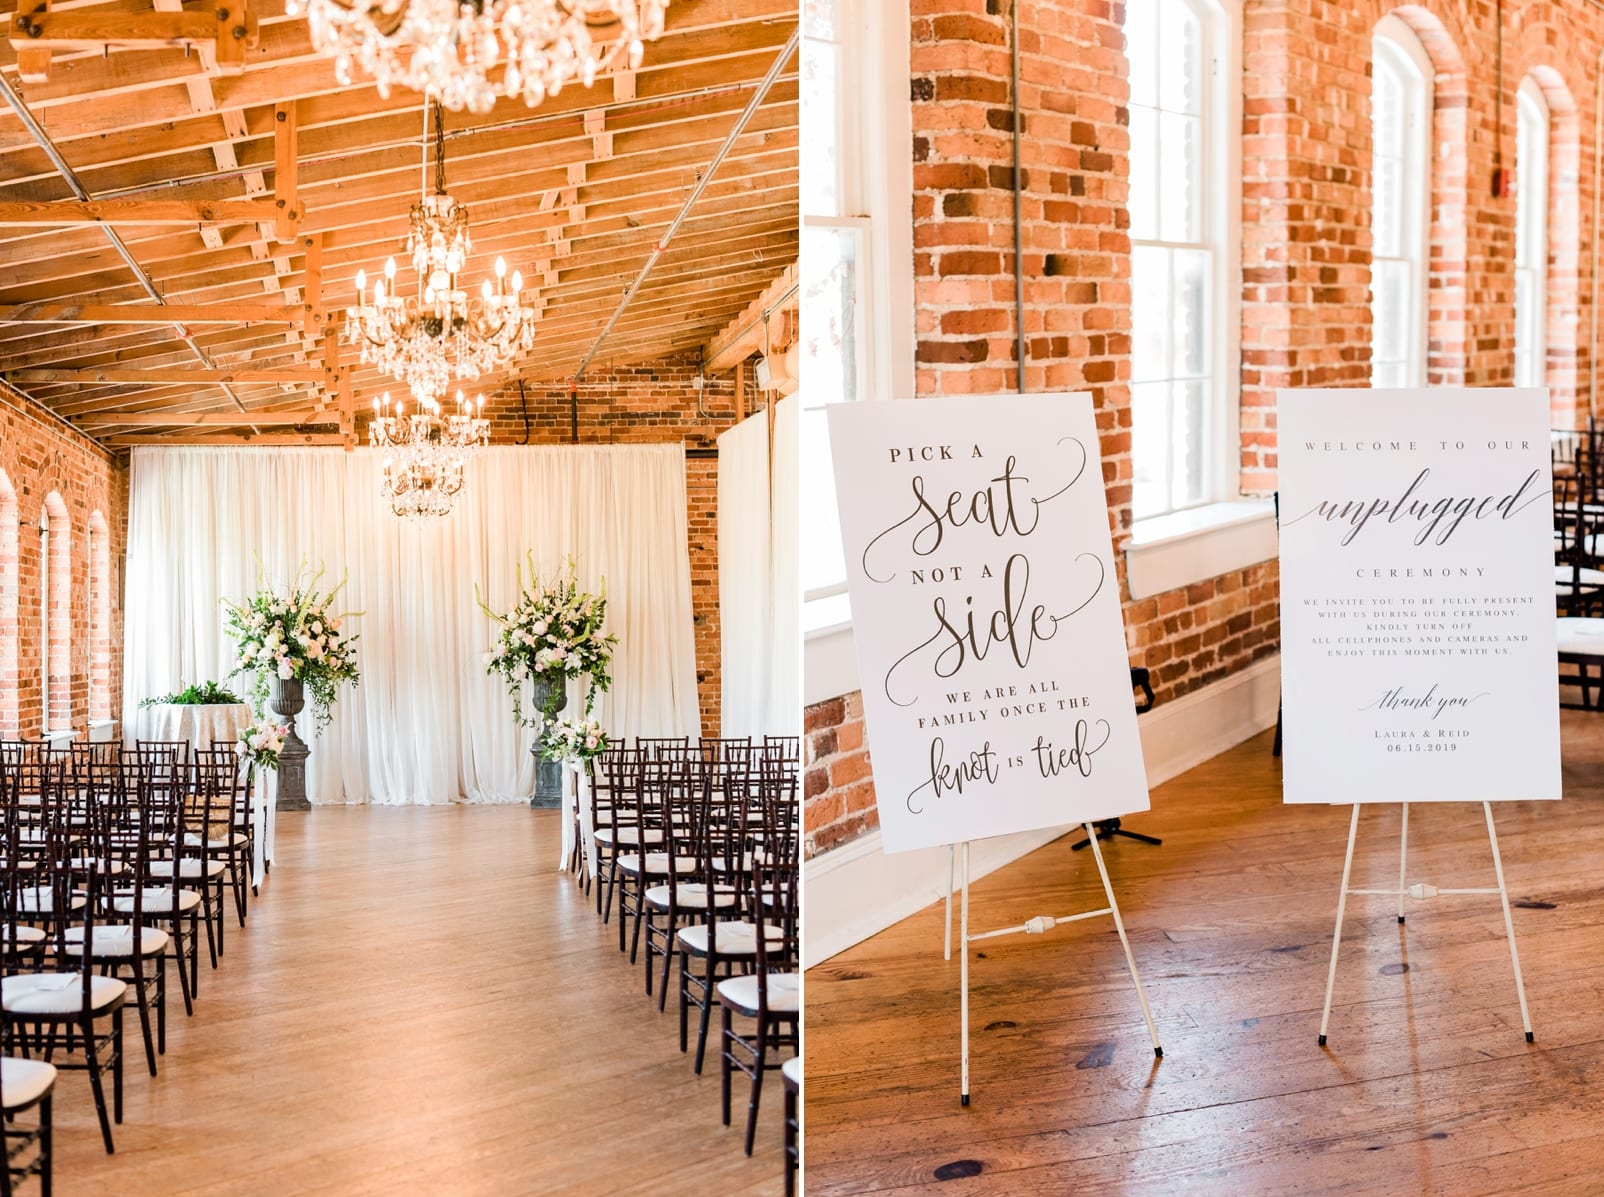 Melrose Knitting Mill wedding ceremony with crystal chandeliers and exposed red brick photo